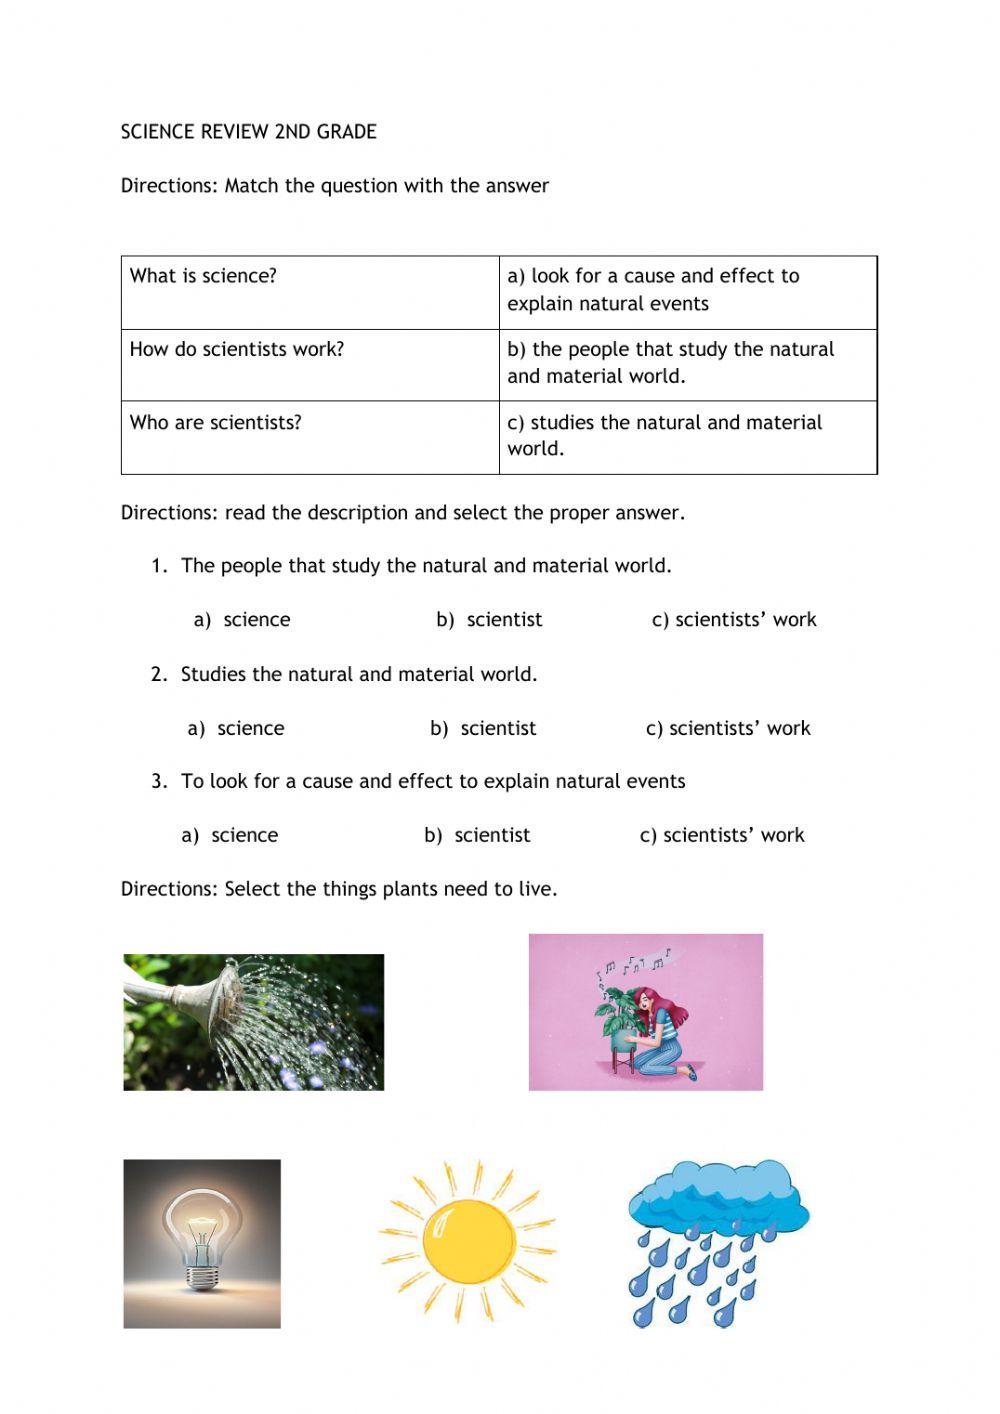 SCIENCE REVIEW 2nd grade